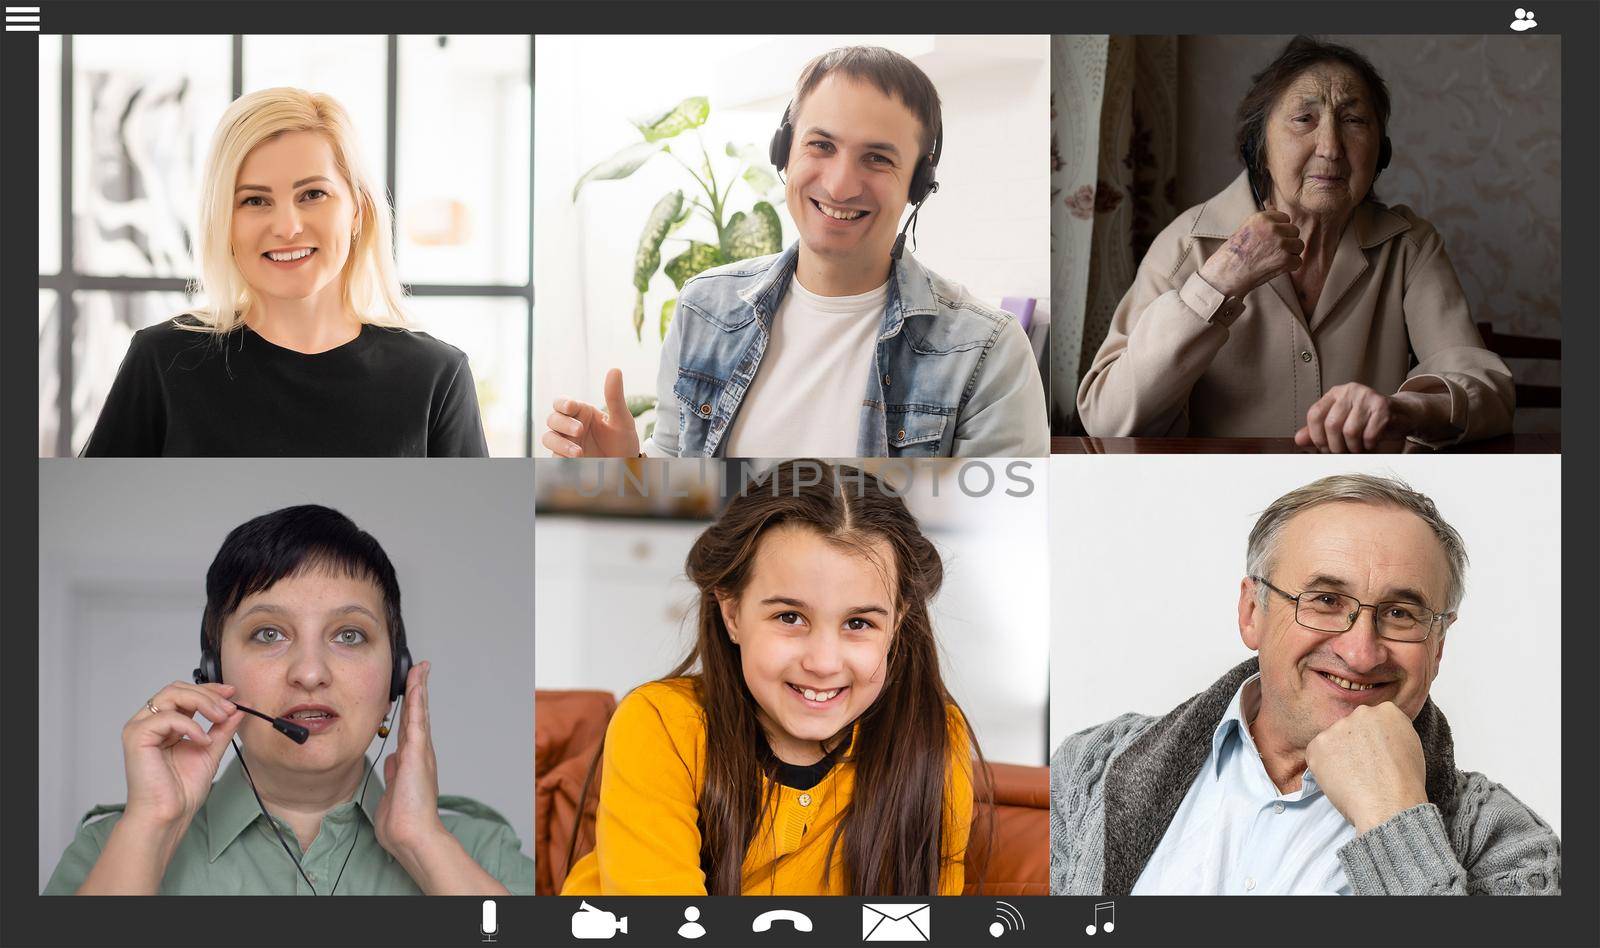 Family chatting distantly using video conferencing service. online virtual chat, relatives glad to see adorable child, enjoying group call.